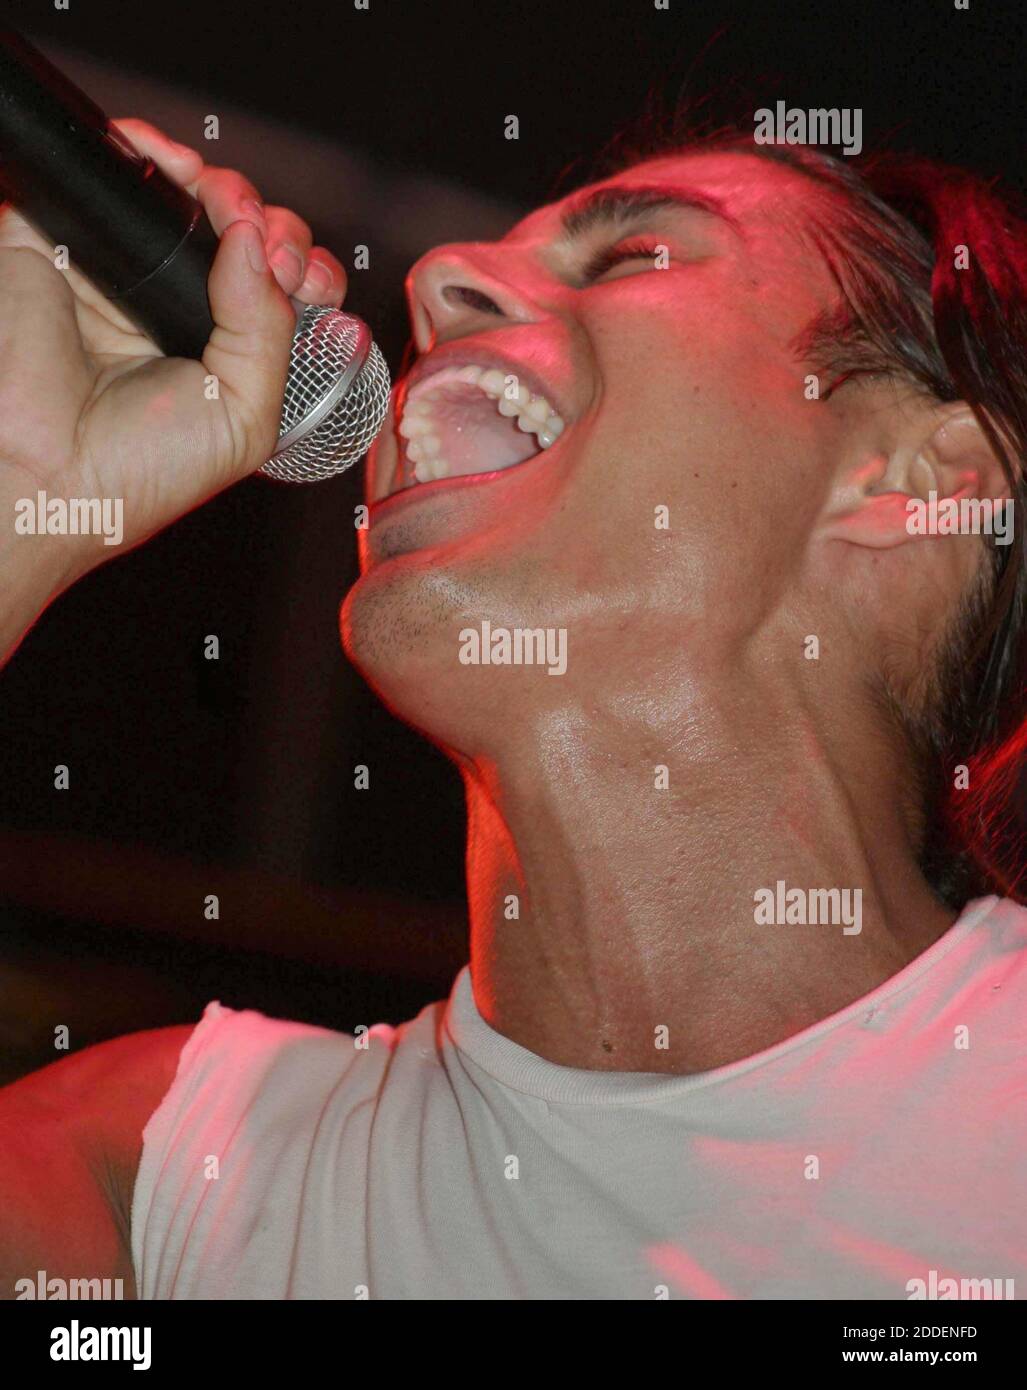 Miami Beach, FL 7-4-2004 Julio Iglesias Jr. performs at a free concert on the beach in honor of the Fourth of July. Photo by ©JR Davis-PHOTOlink Stock Photo